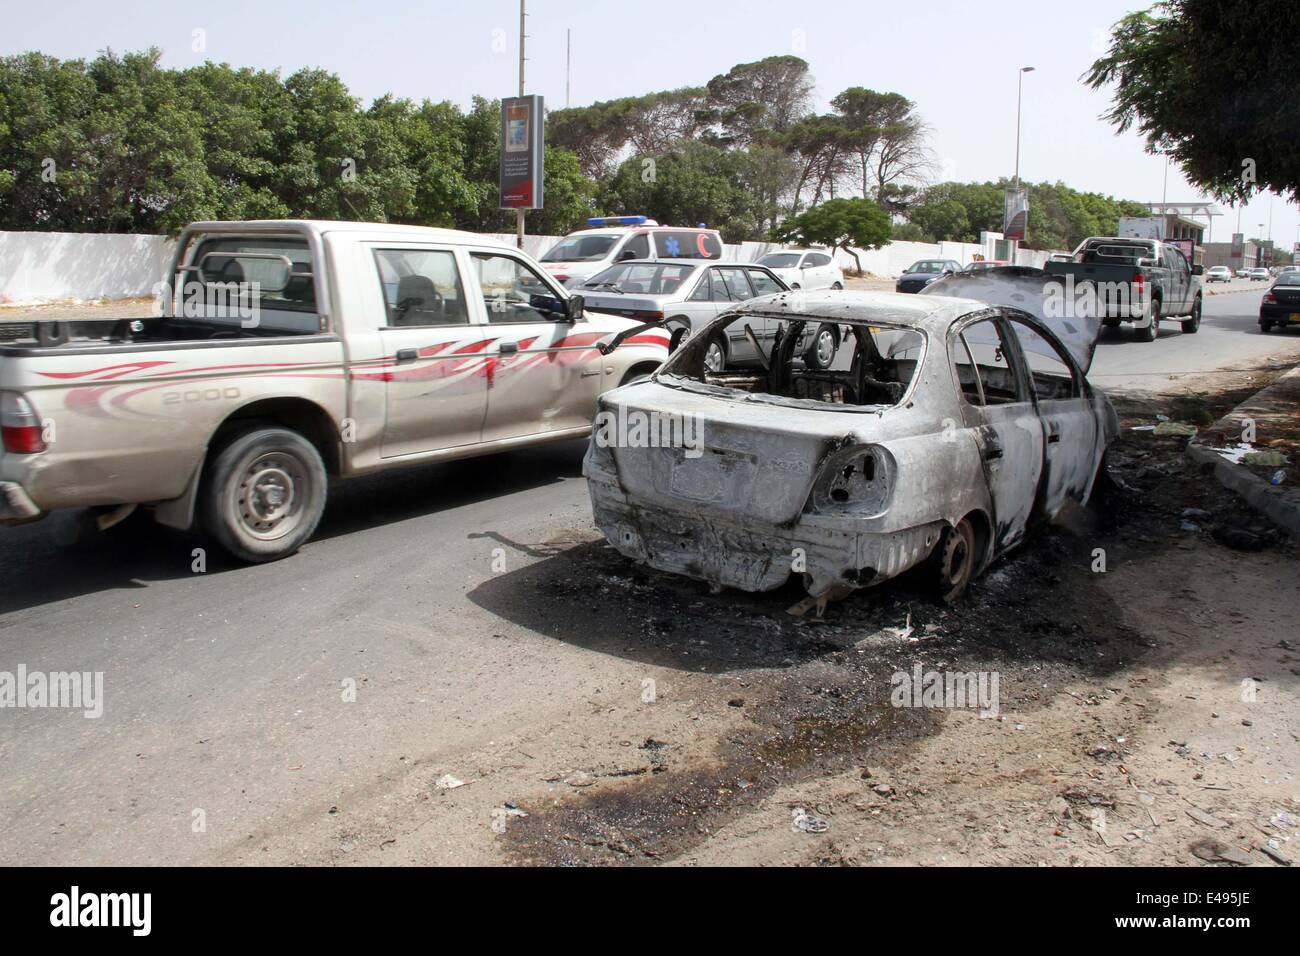 Tripoli, Libya. 6th July, 2014. The picture taken on July 6, 2014 shows a damaged car in Janzour area of Tripoli, Libya. Heavy fighting erupted in the Libyan capital city of Tripoli since the early hours of Sunday between the Interior Ministry's auxiliary security forces and a militia group called 'Knights Battalion', killing one person and injuring three others. (Xinhua/Hamza Turkia) Stock Photo